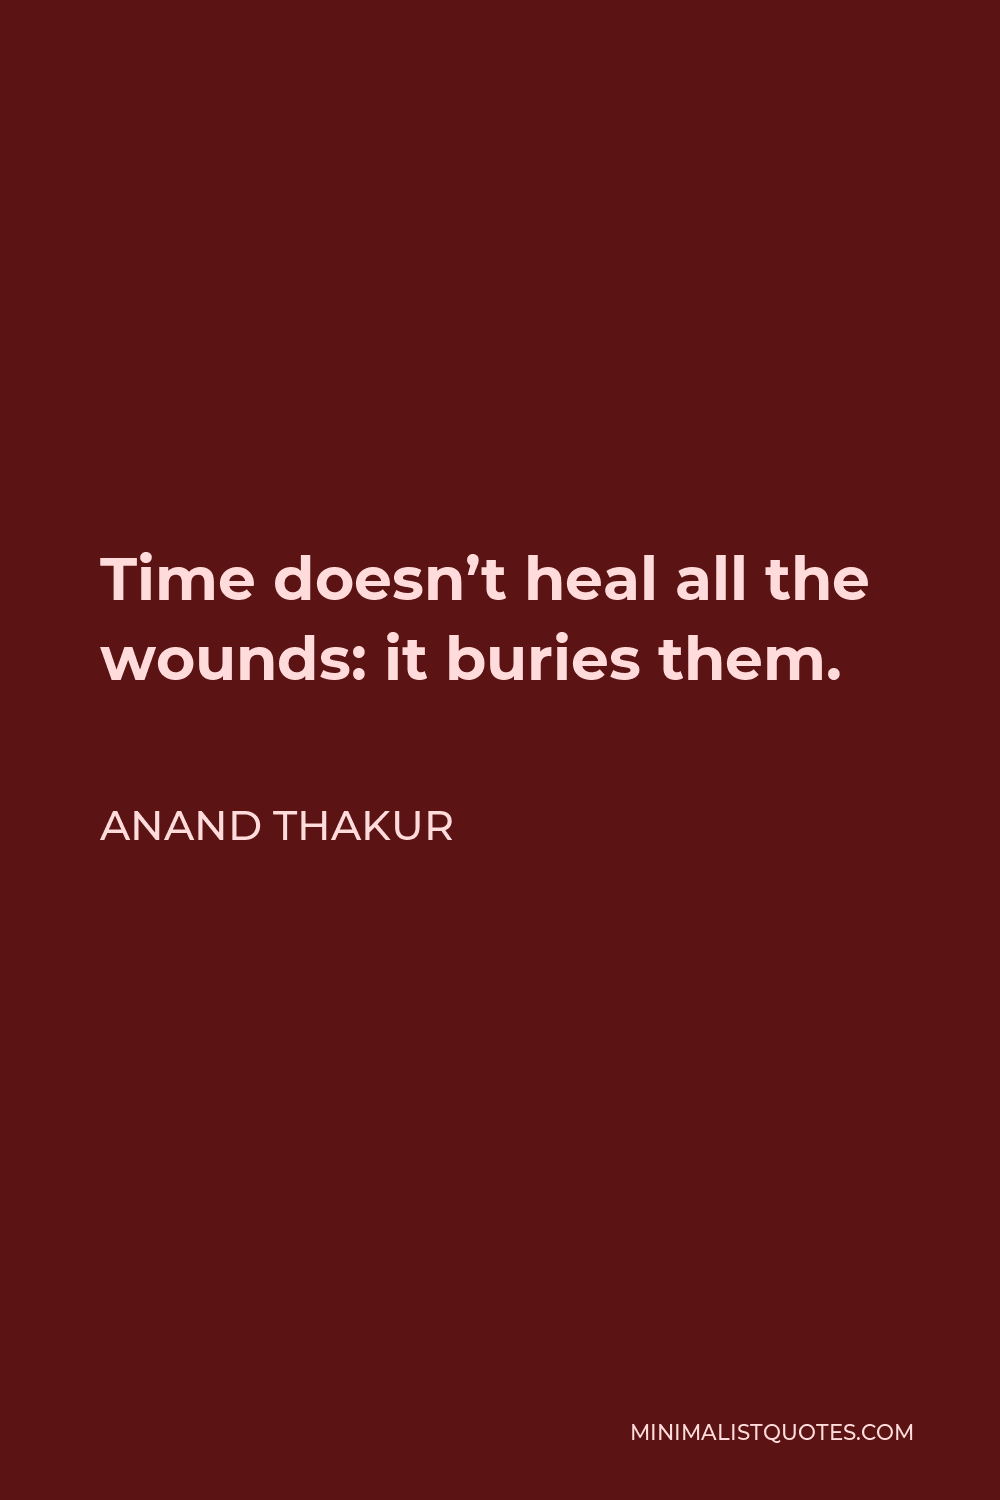 Anand Thakur Quote: Time doesn't heal all the wounds: it buries them.